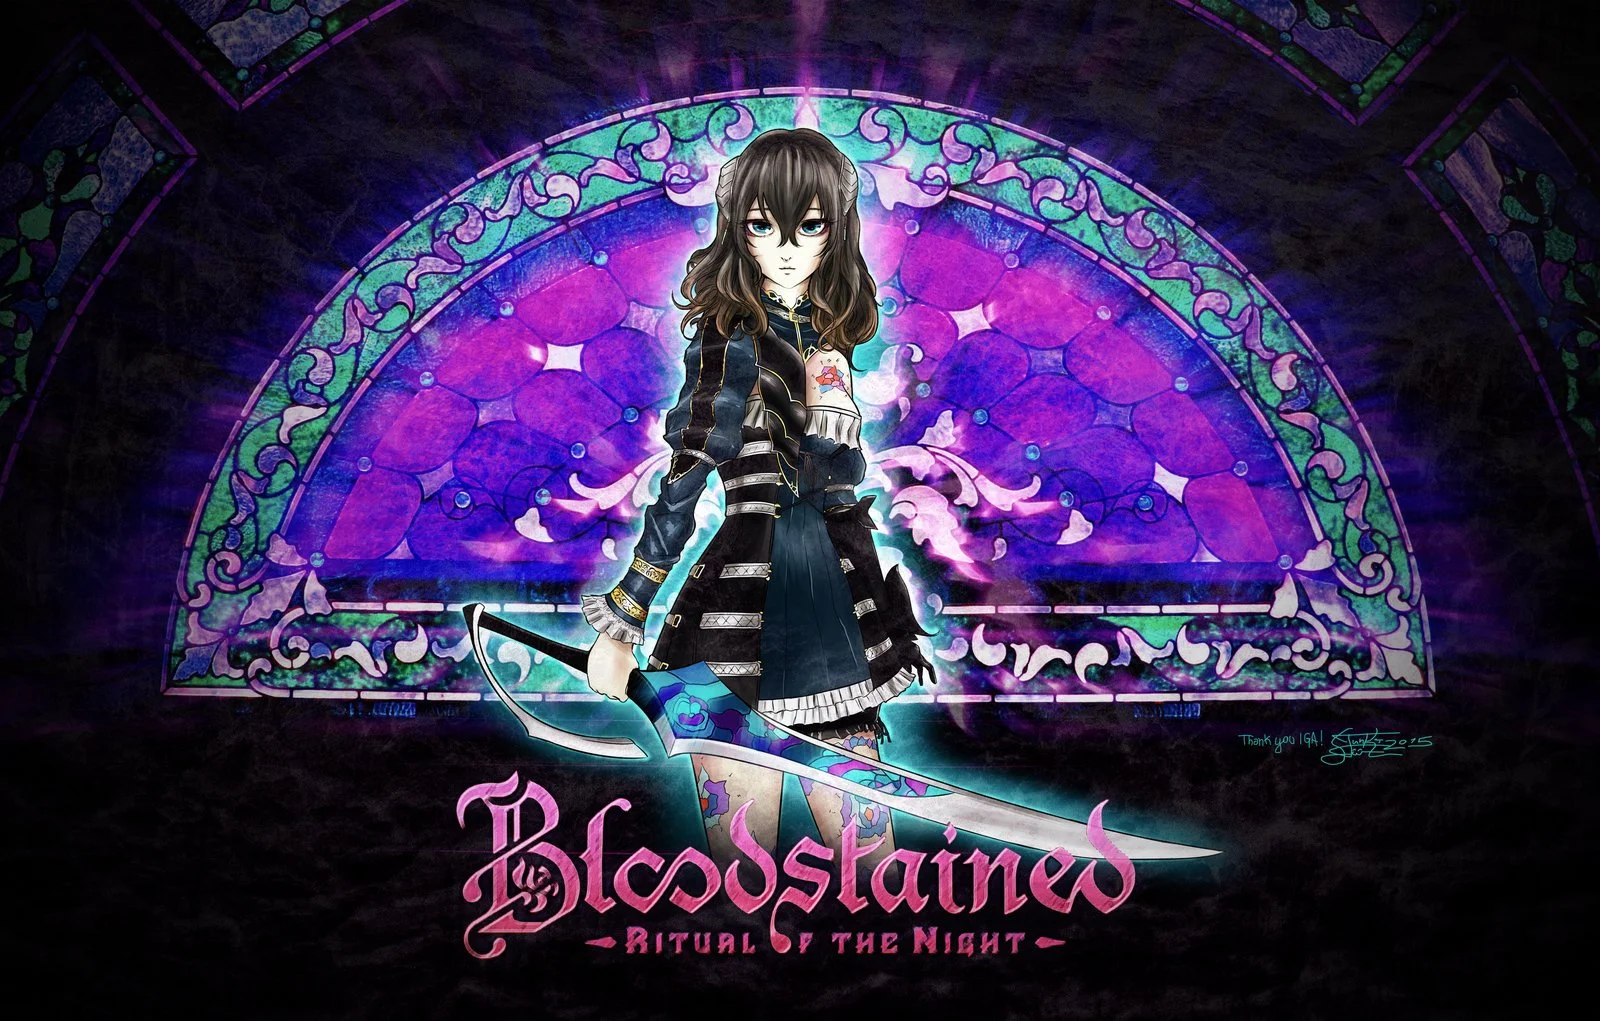 Bloodstained: Ritual of the Night перенесли на 2018 год - фото 1